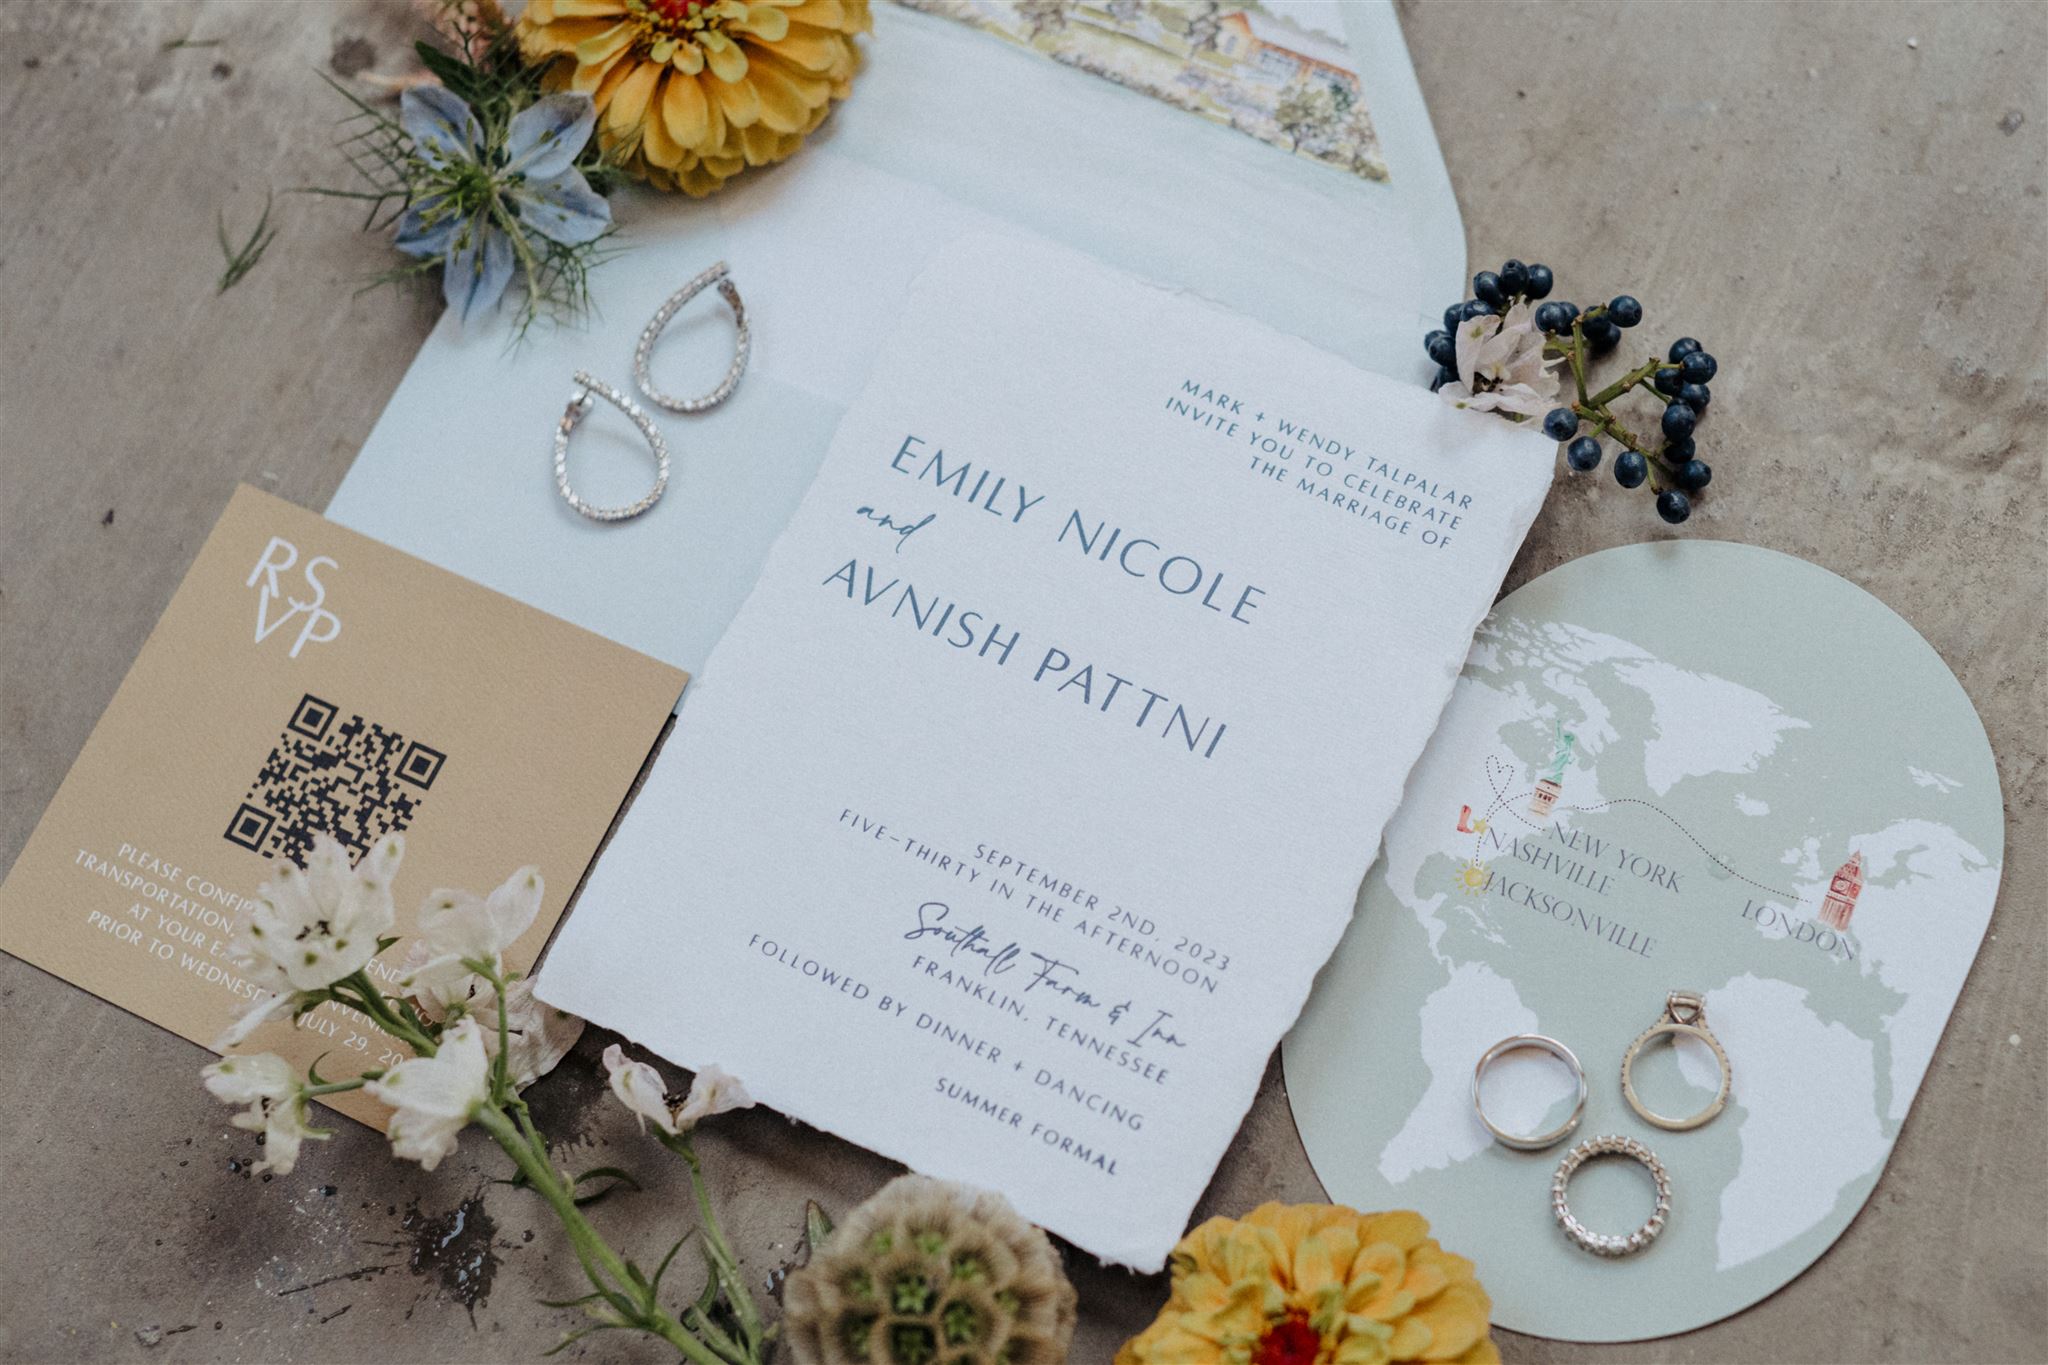 Custom wedding invitation suite. styled with jewelry, florals, and custom paper goods.